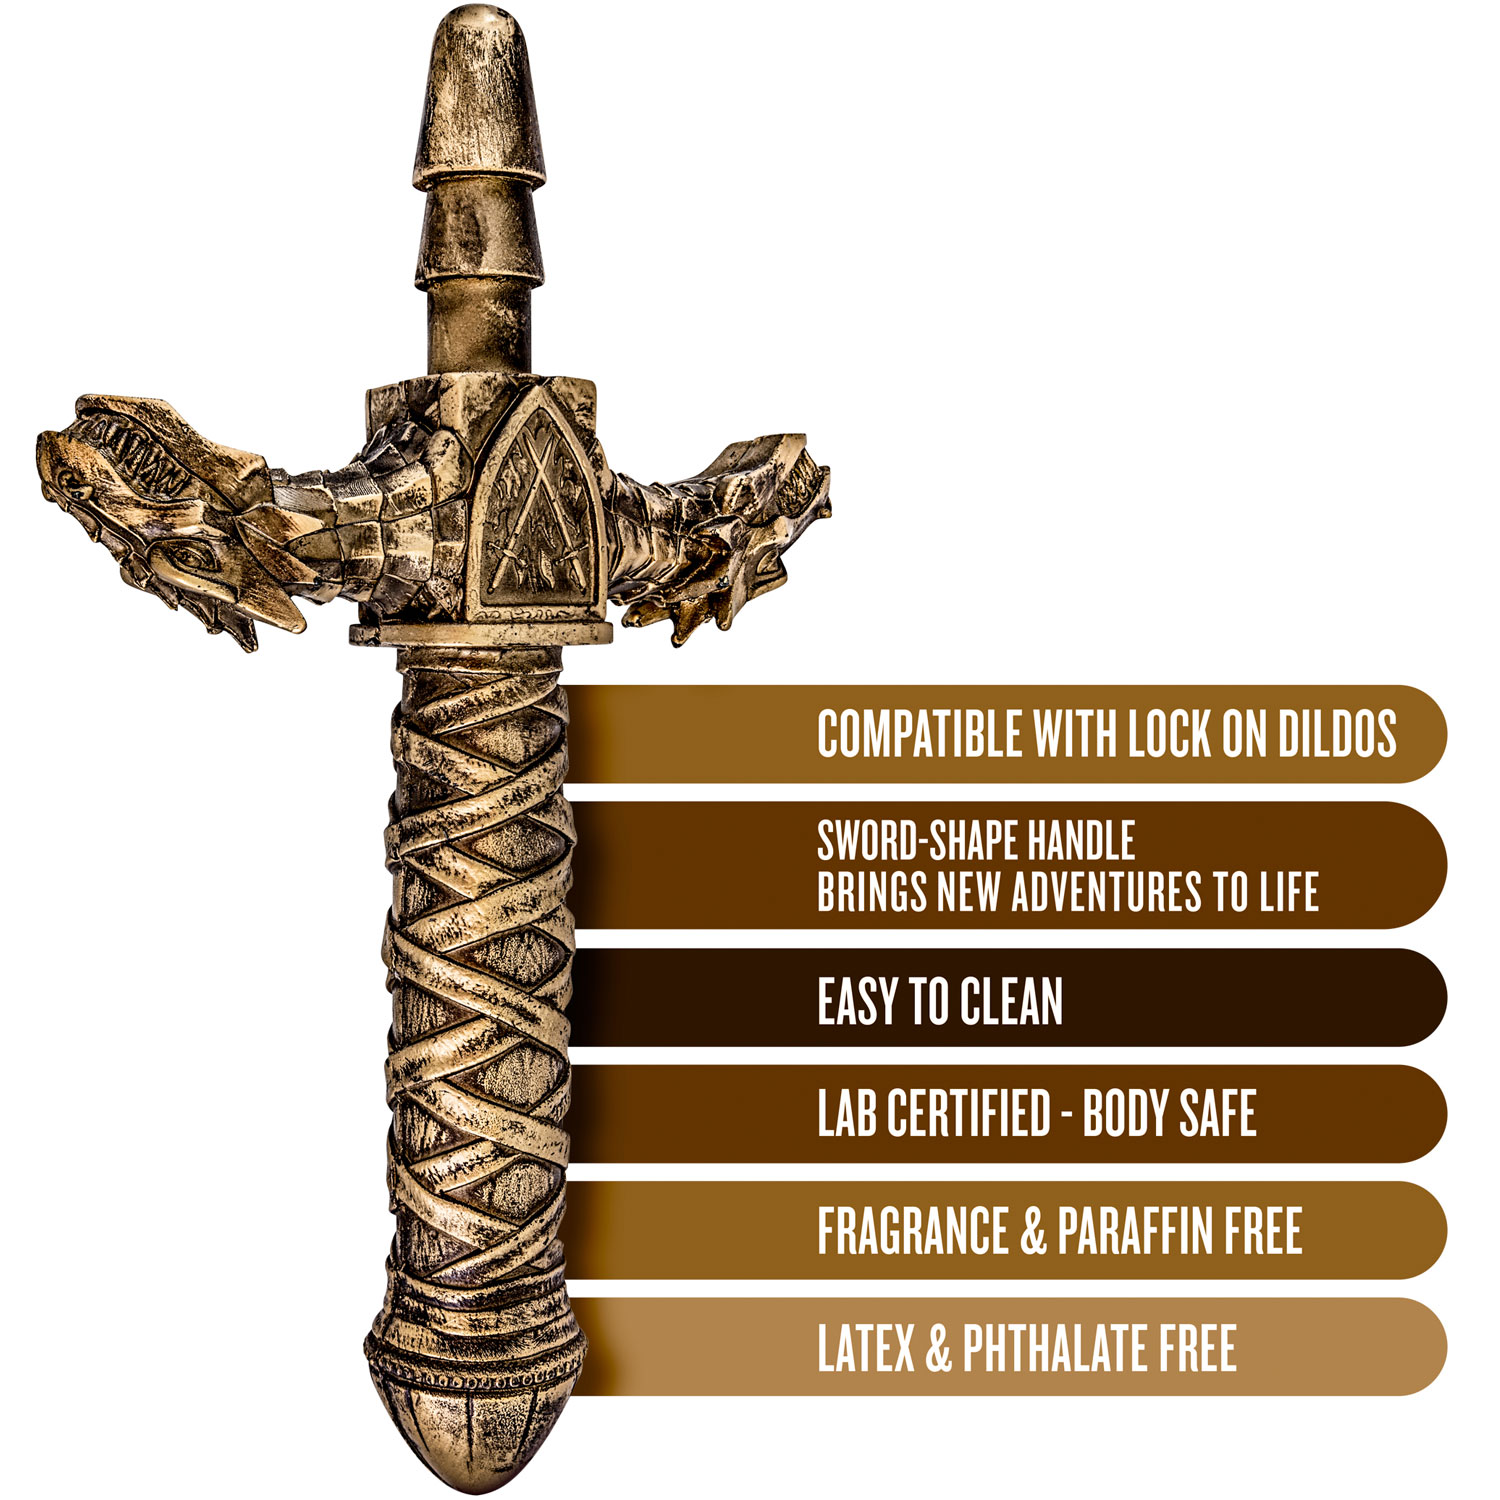 The Realm Drago Lock On Dragon Sword Handle - Features